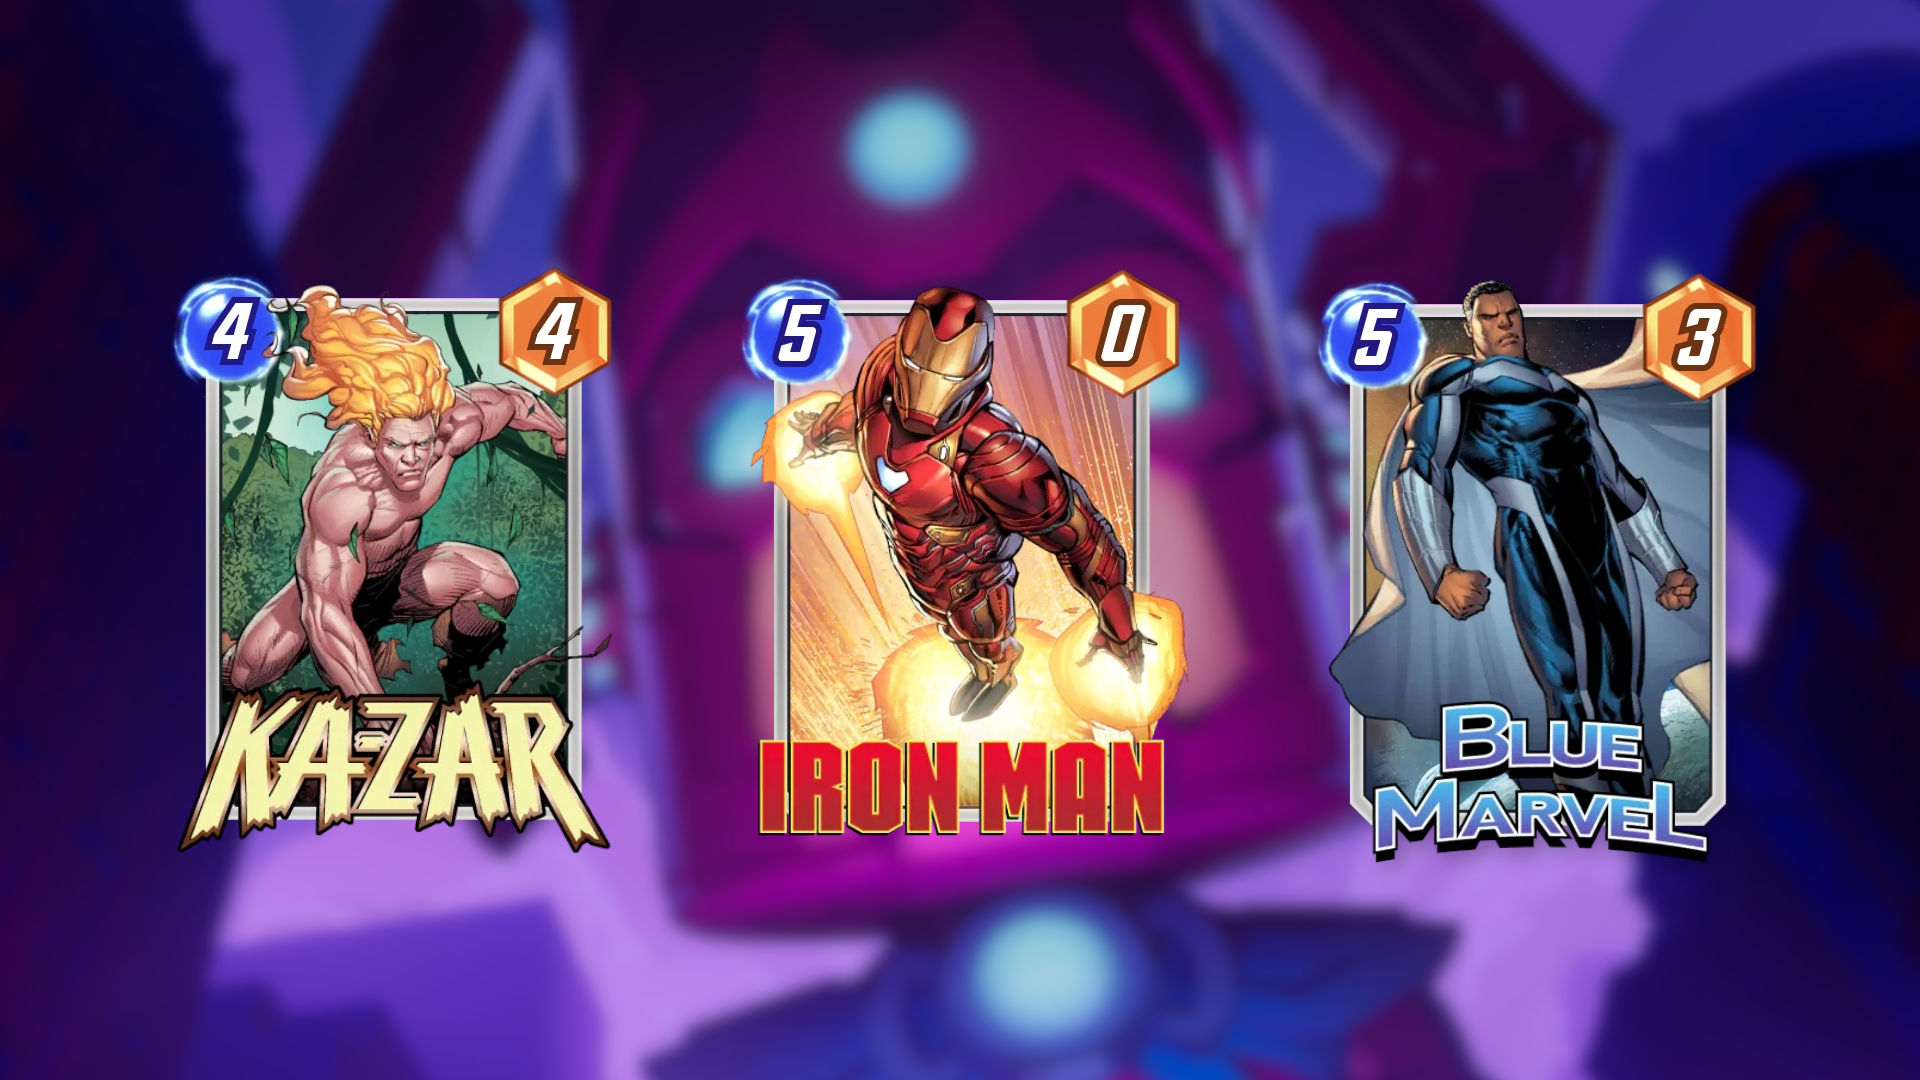 Star Lord - Marvel Snap Card Database